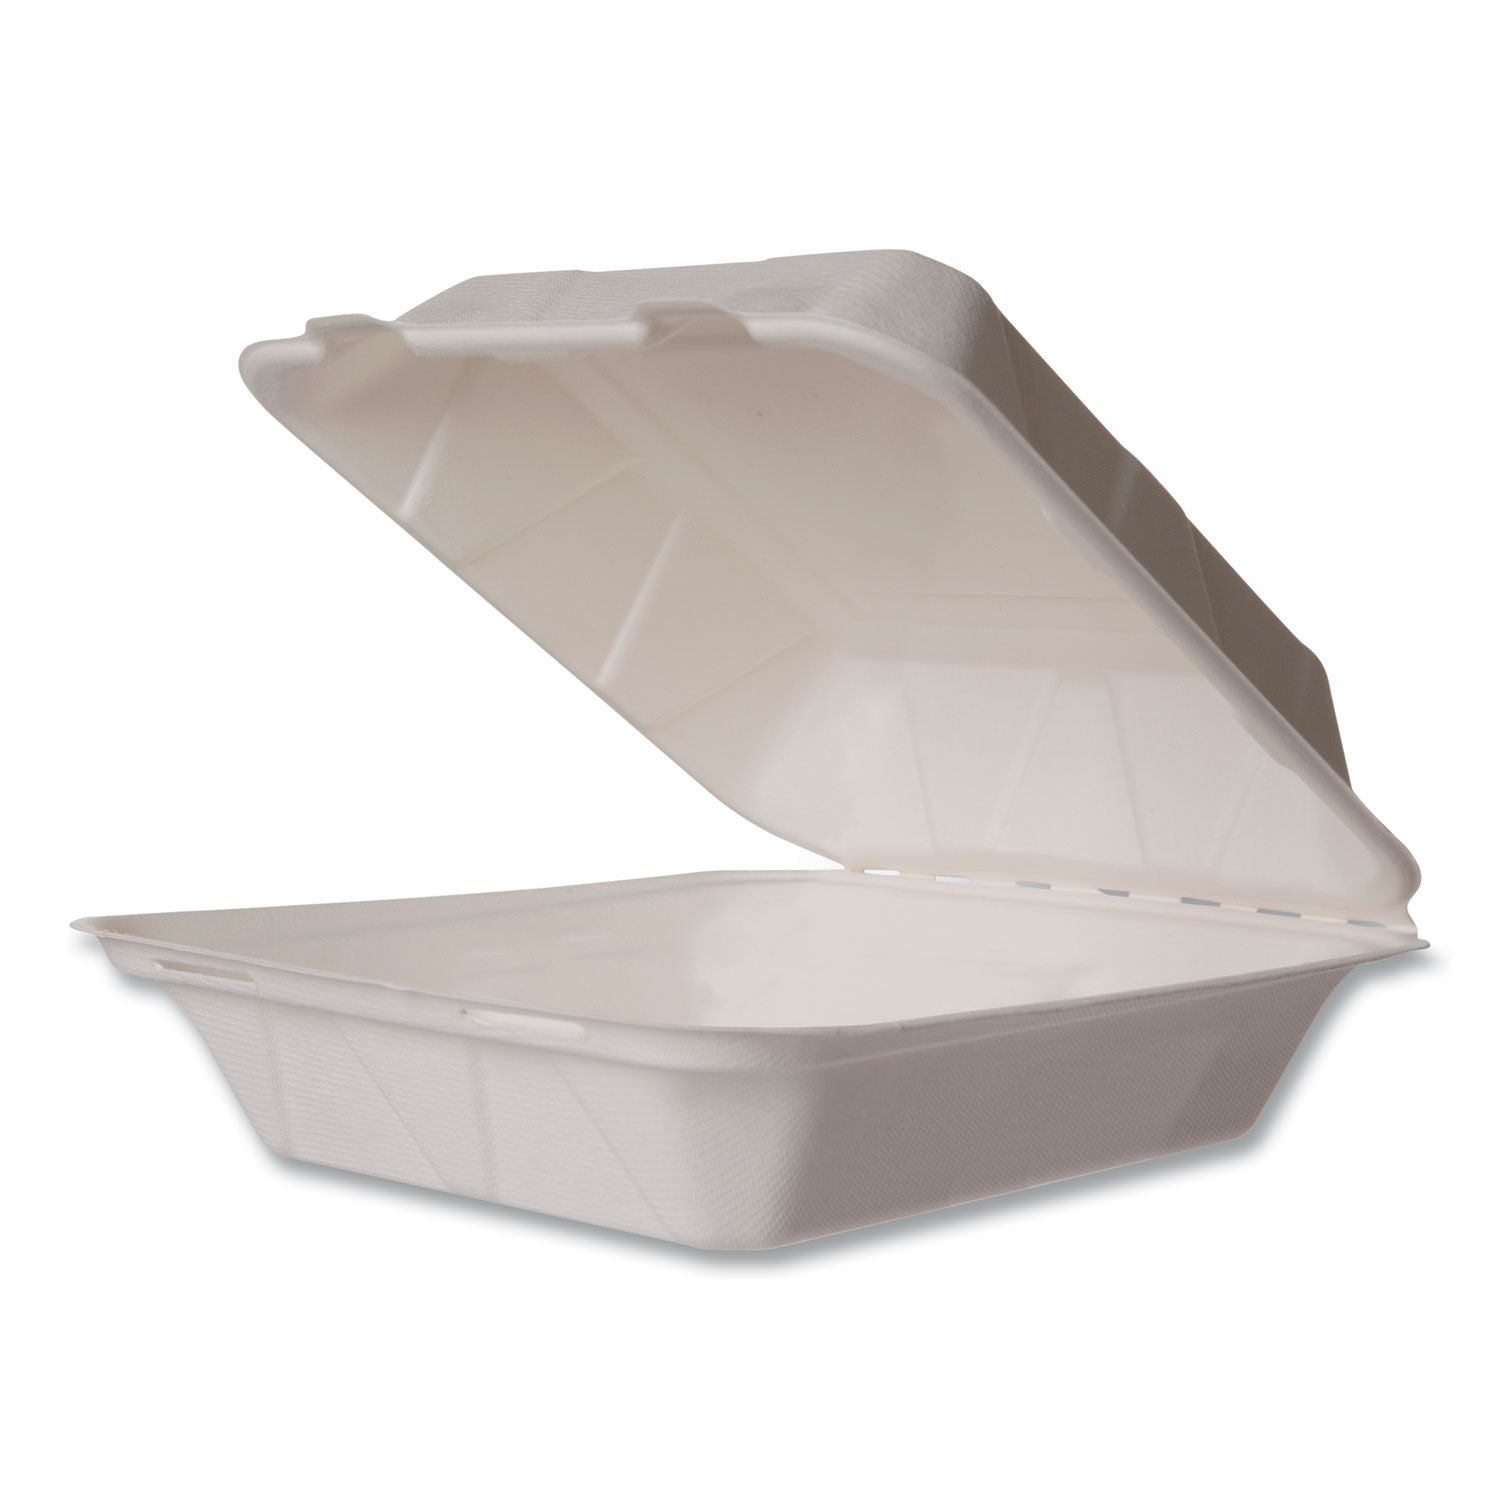 Carryout Containers & Boxes